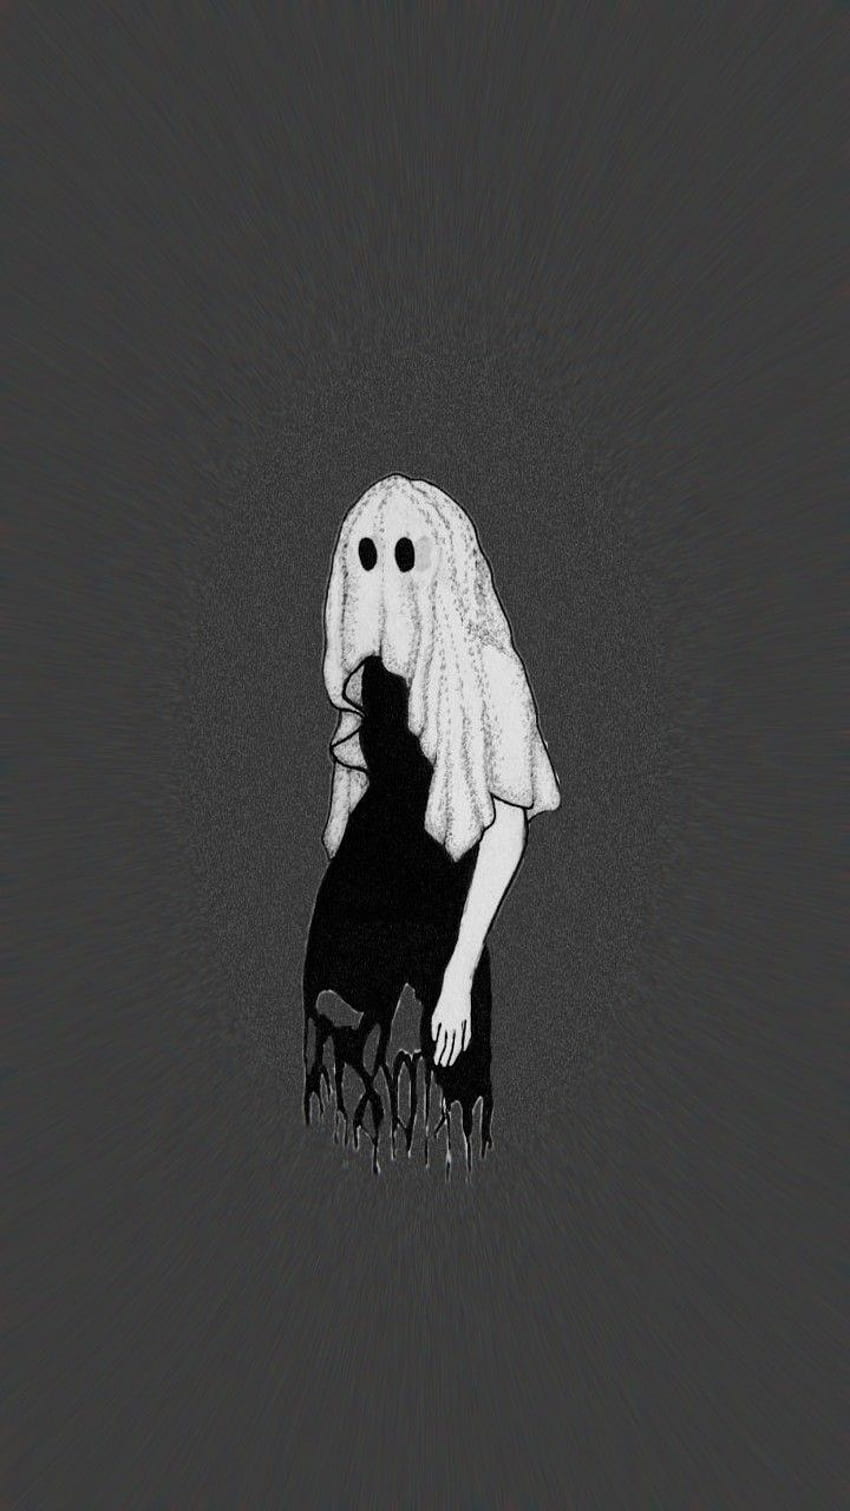 A black and white illustration of a ghostly figure holding a shadow of a person. - Horror